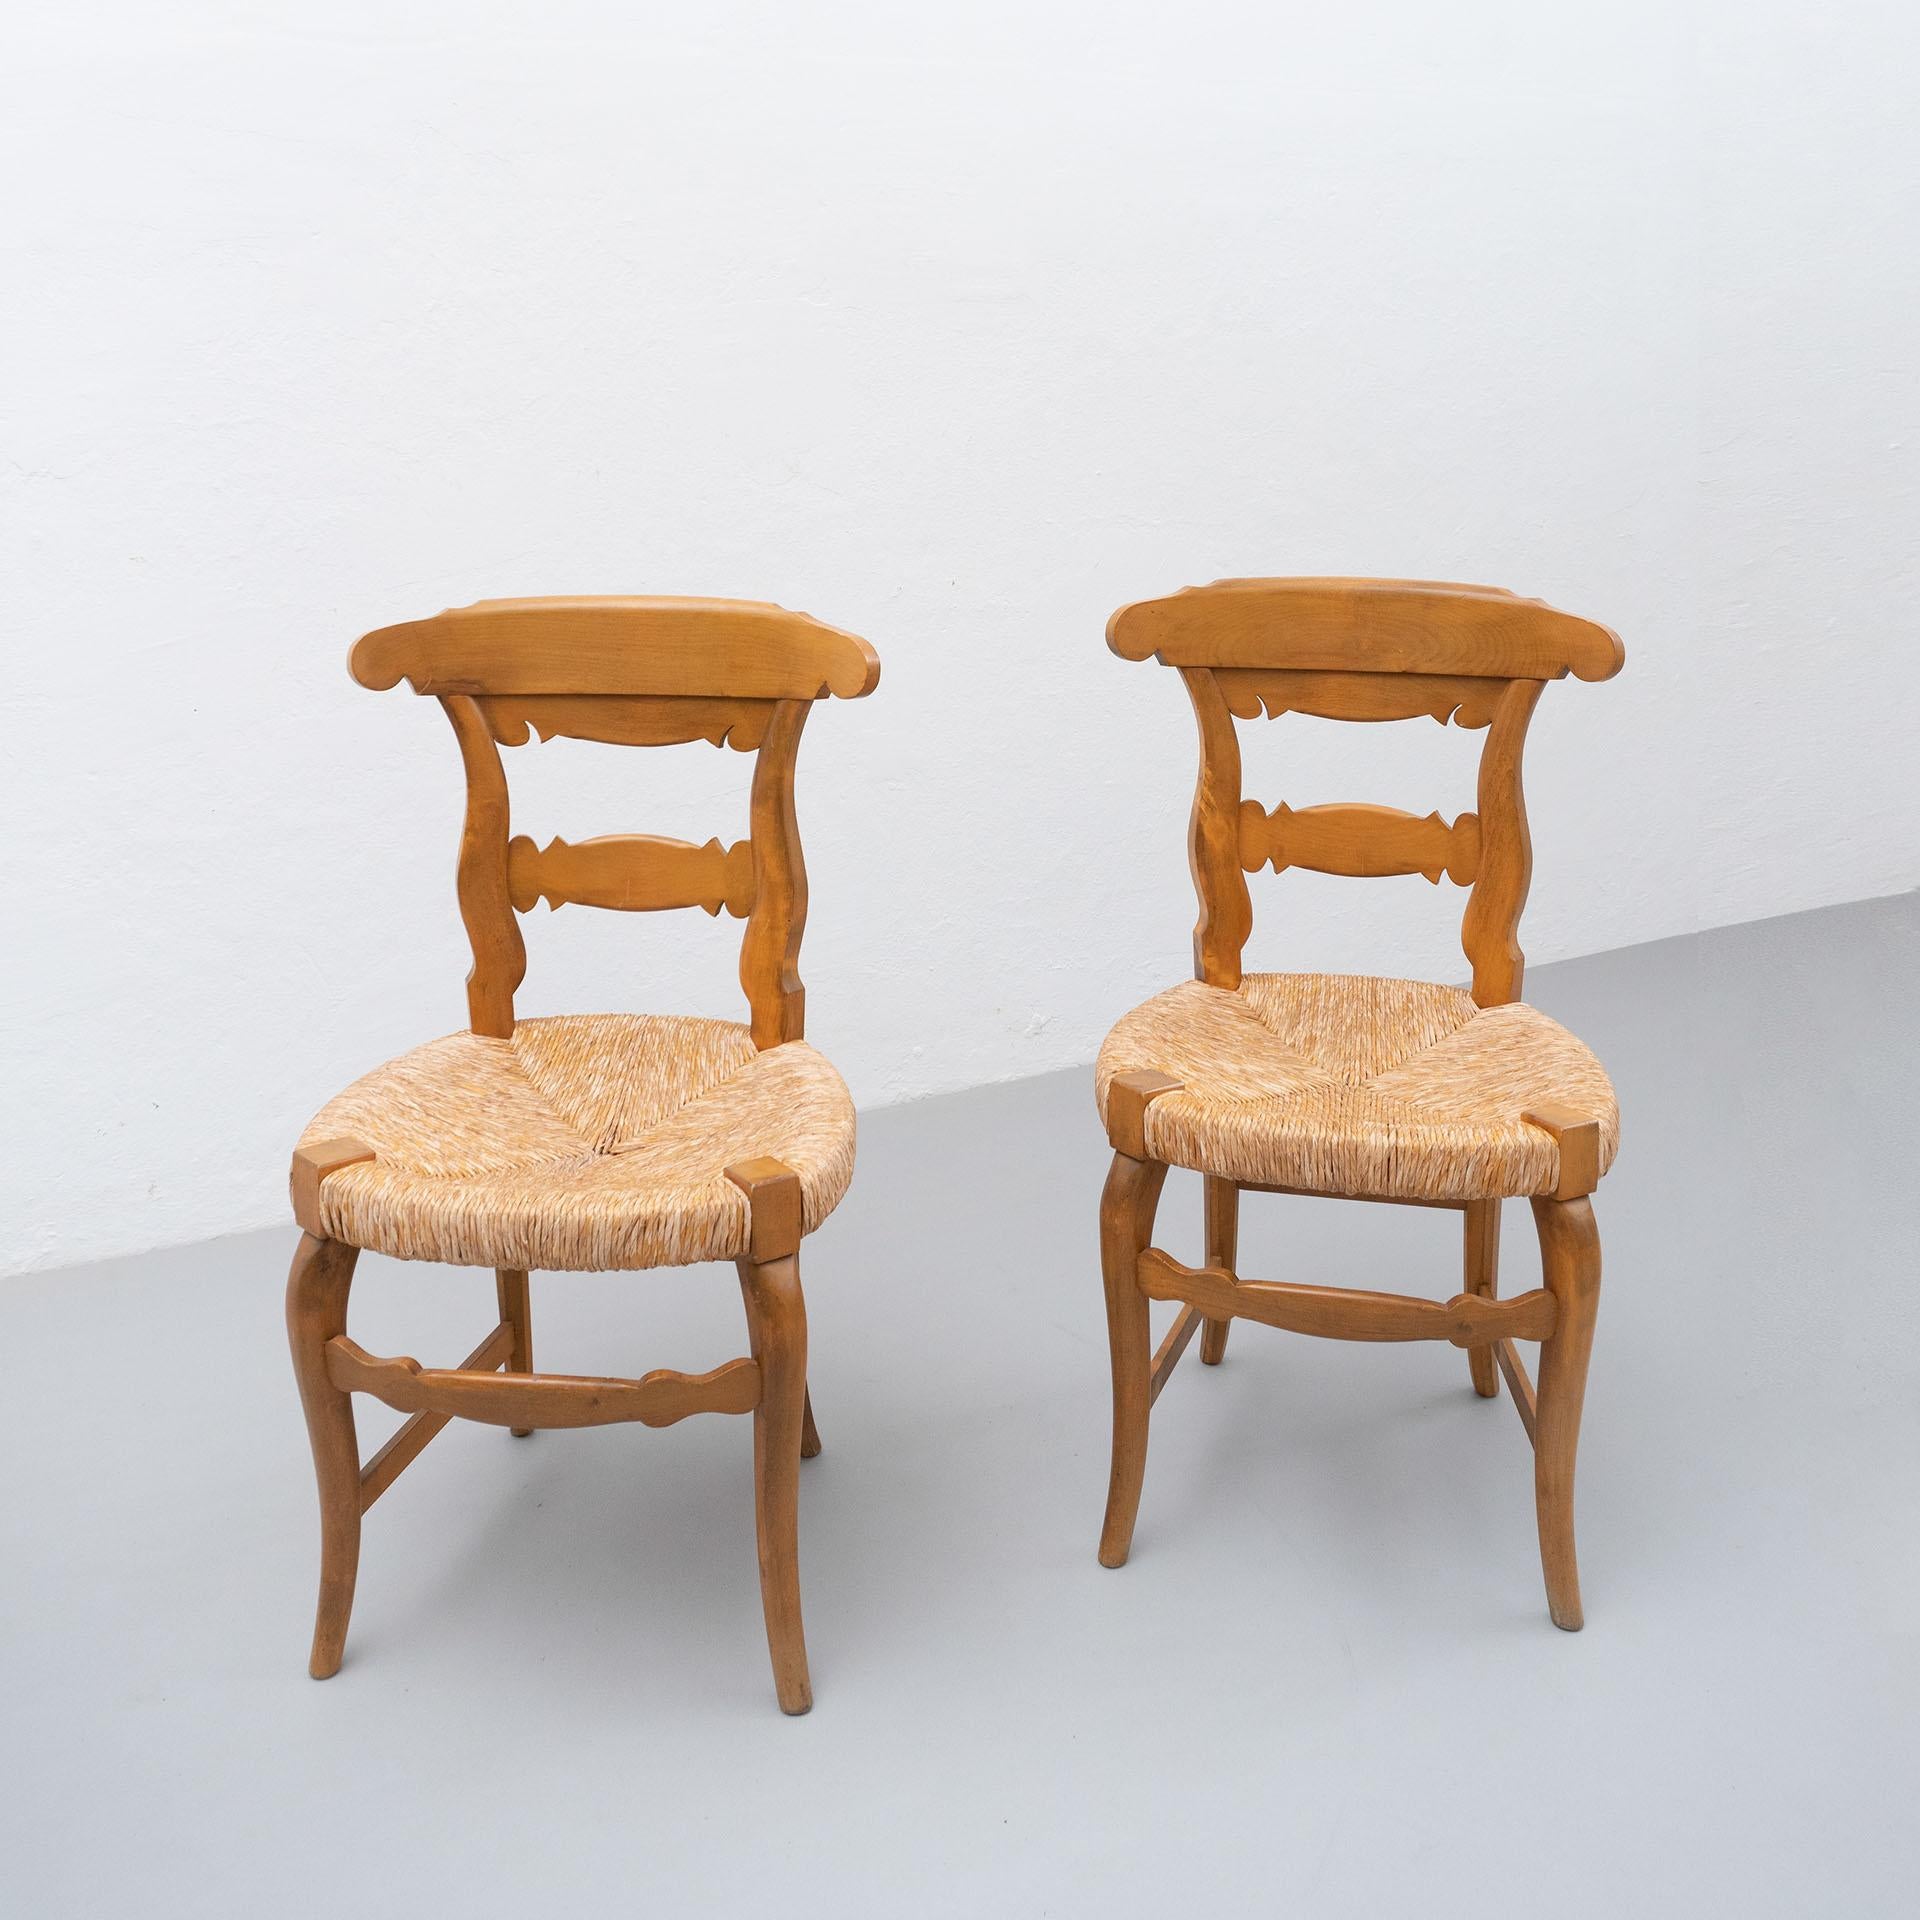 Early 20th century set of two provenzal chairs. Wooden chairs with a traditional rattan seat, curved lines and characteristic details of French Provincial style.

In good original condition, with minor wear consistent with age and use, preserving